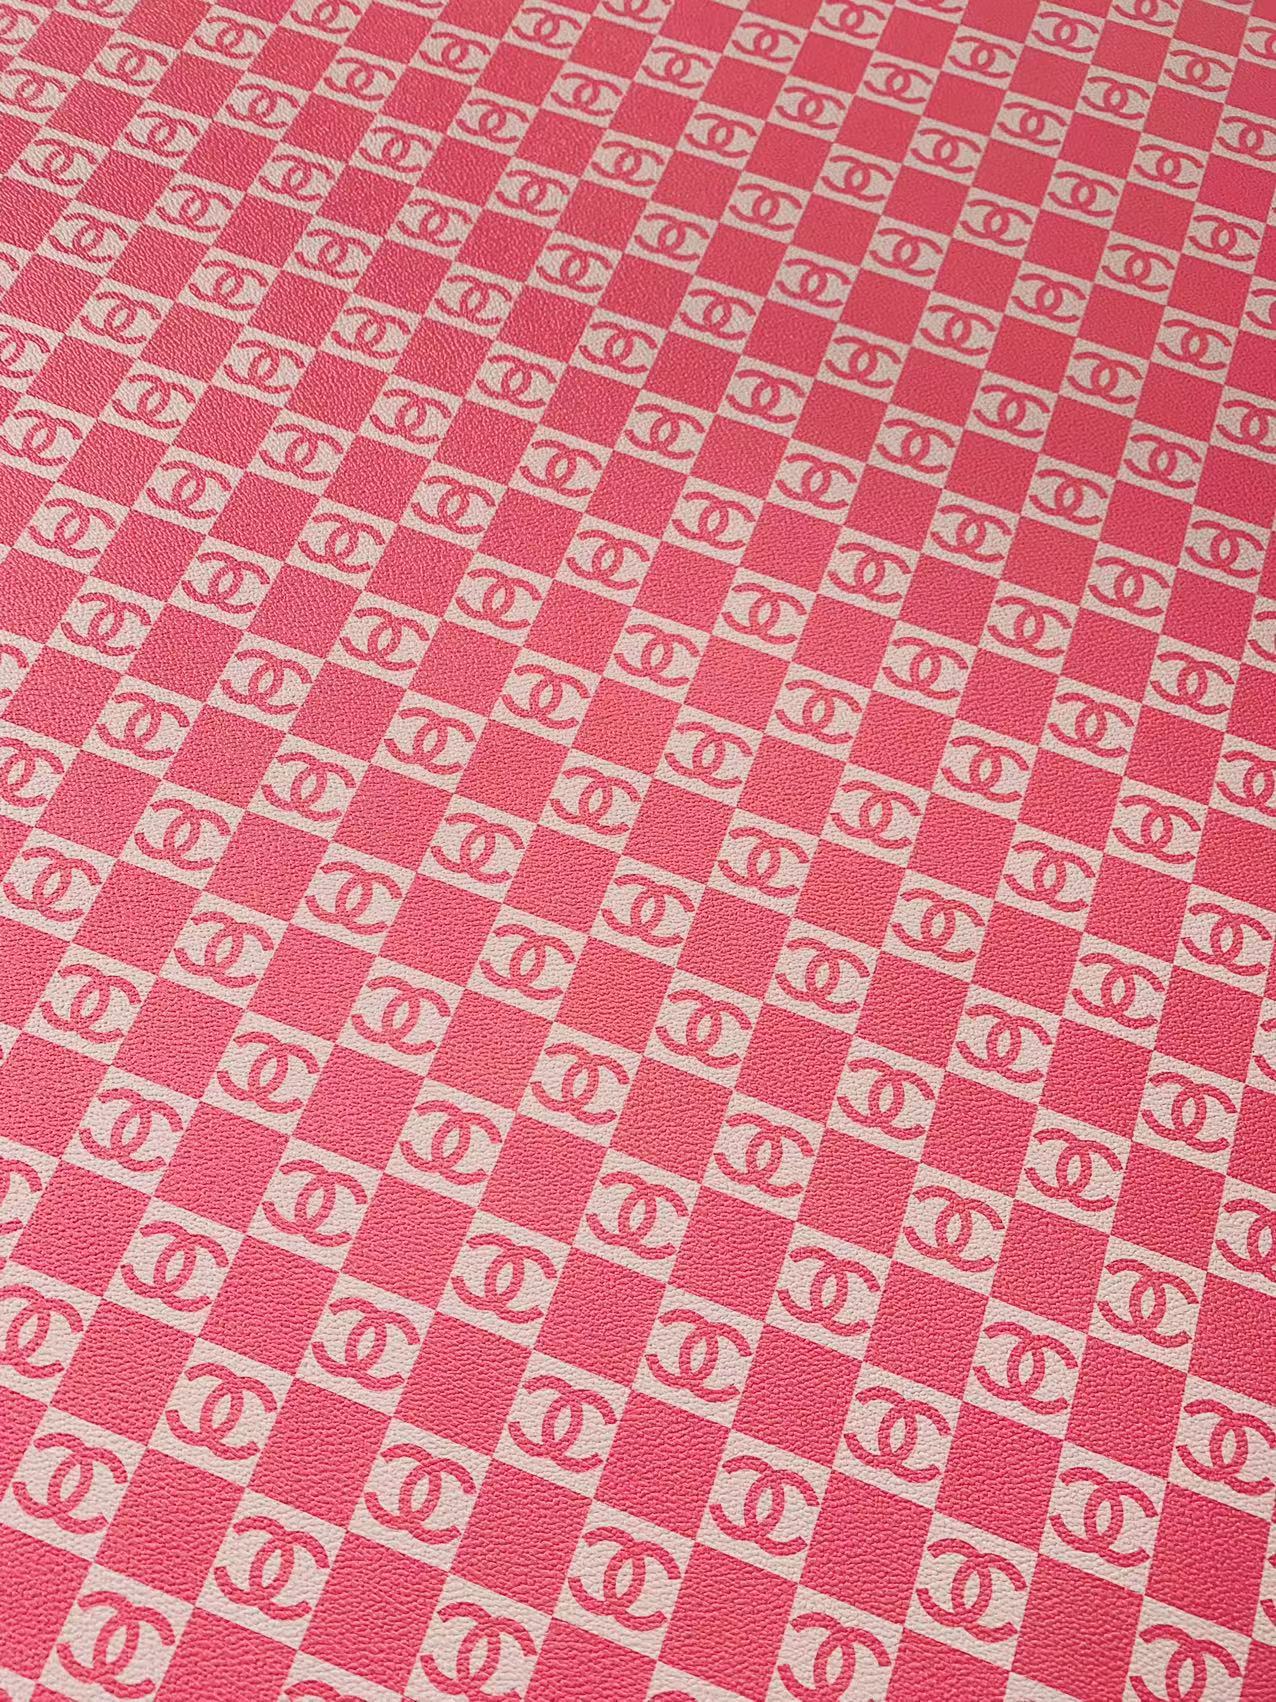 Fashion 1 inch Size Pink Chanel Design Leather Fabric For Handmade